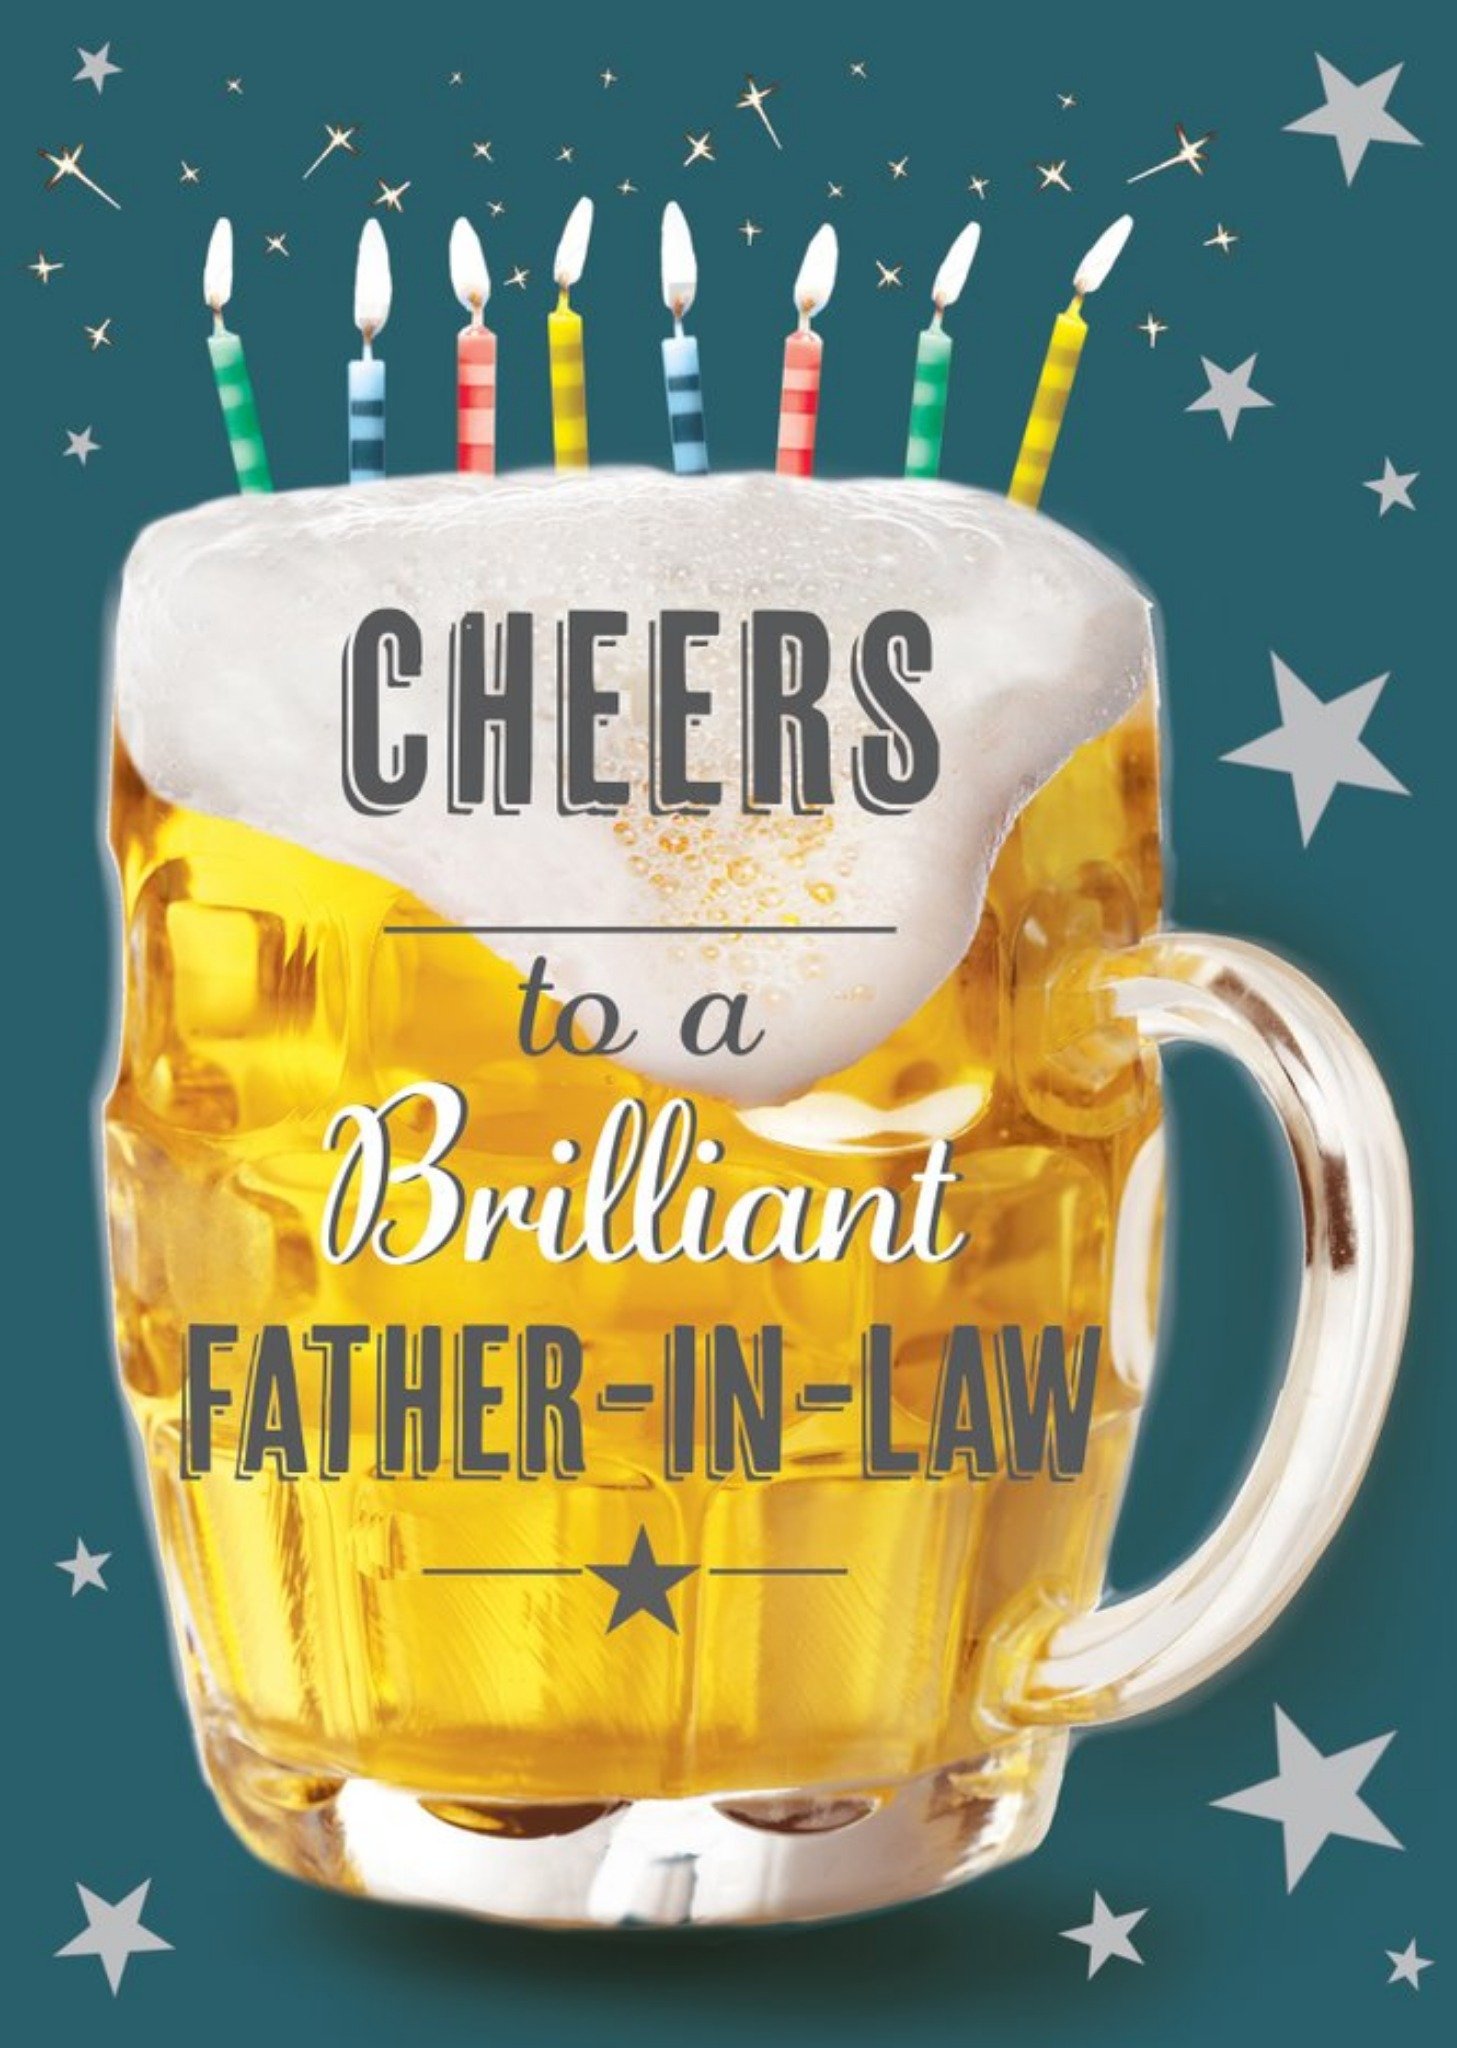 Moonpig Clintons Illustrated Pint Of Beer Cheers To A Brilliant Father In Law Card Ecard